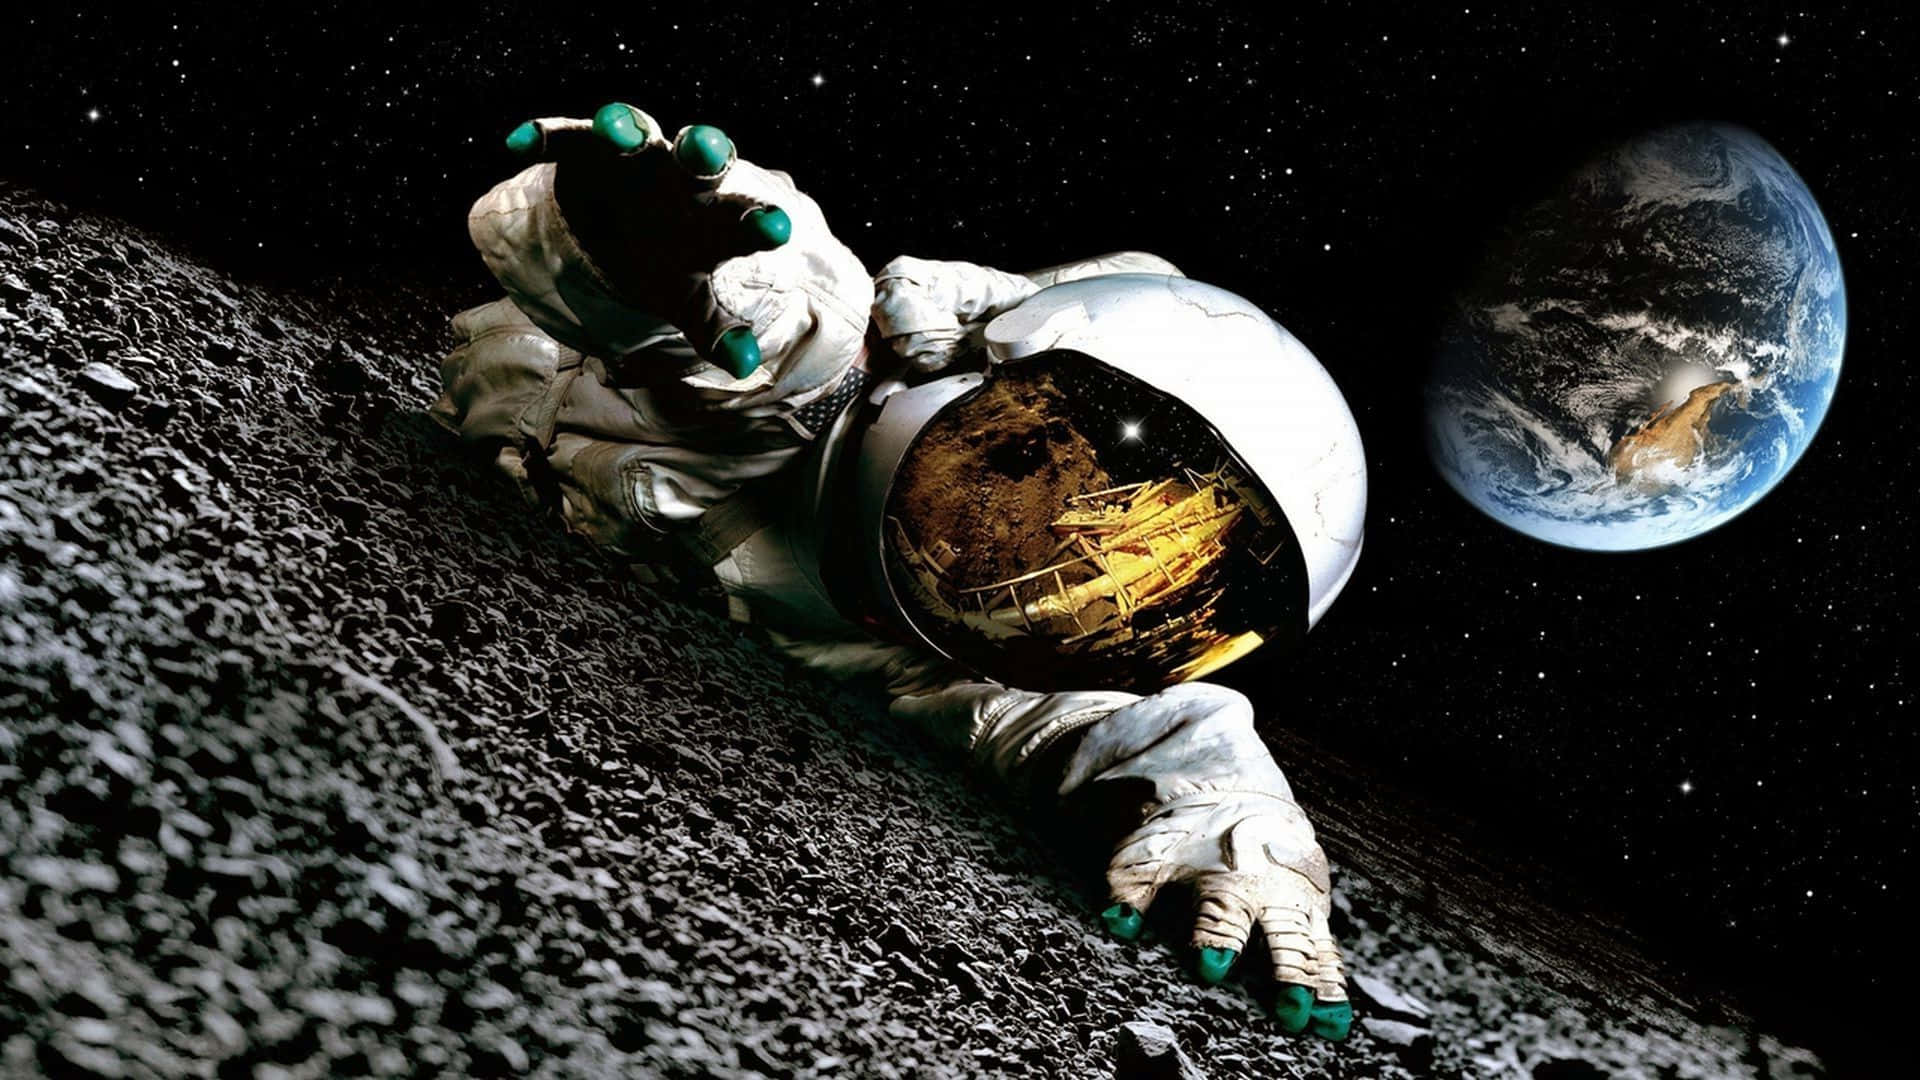 Fascinating View Of Brave Astronaut On Lunar Surface Wallpaper